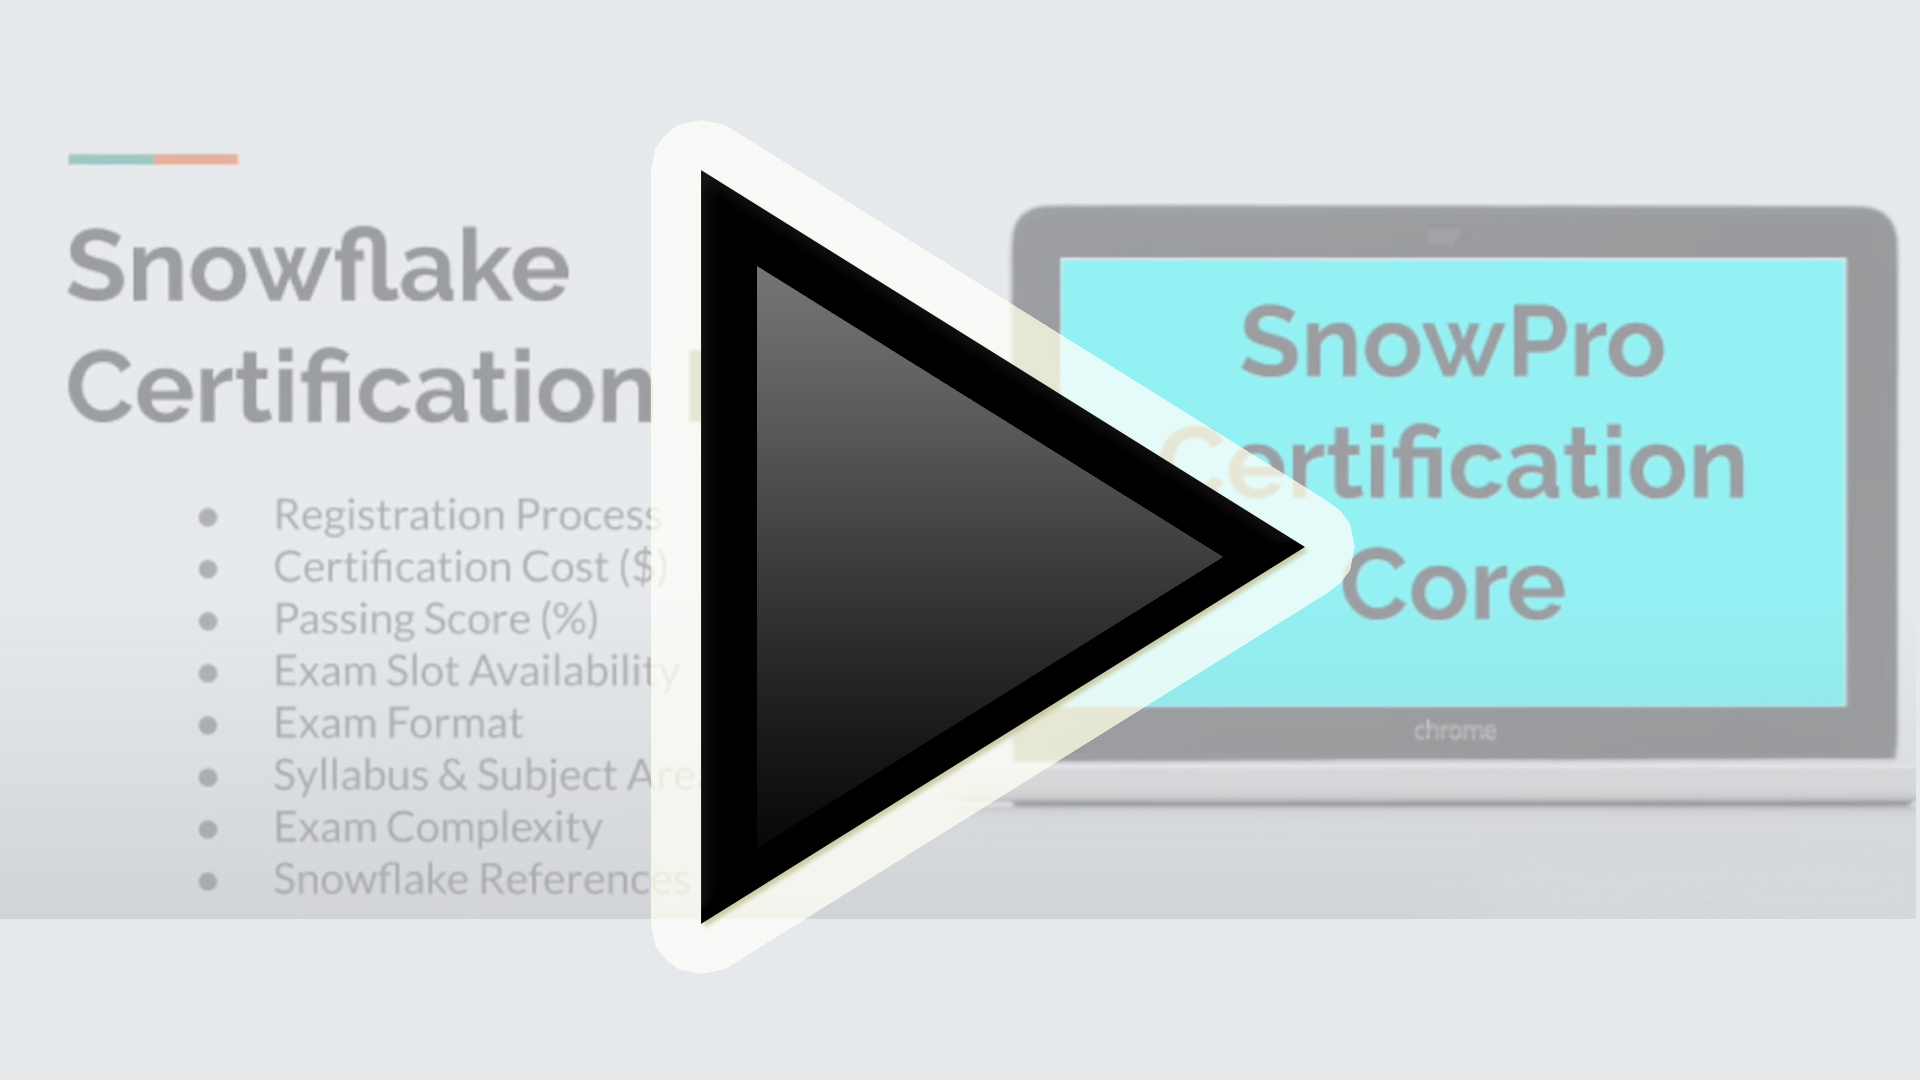 Enhancing your data management career with Snowflake Certification